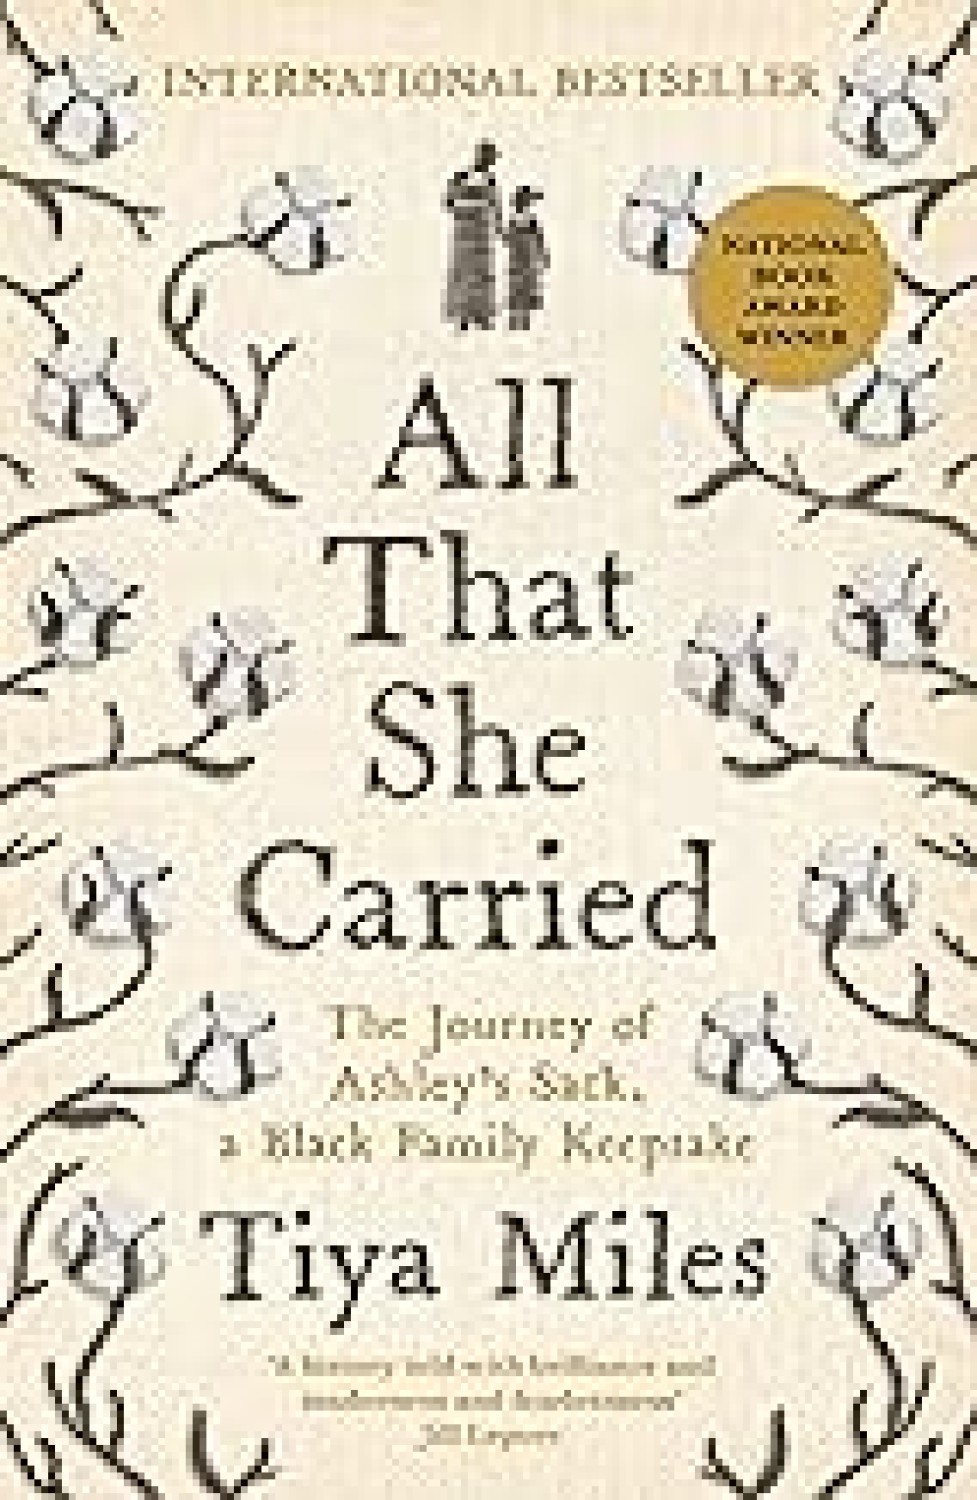 ALL THAT SHE CARRIED : THE JOURNEY OF ASHLEY'S SACK A BLACK FAMILY KEEPSAKE